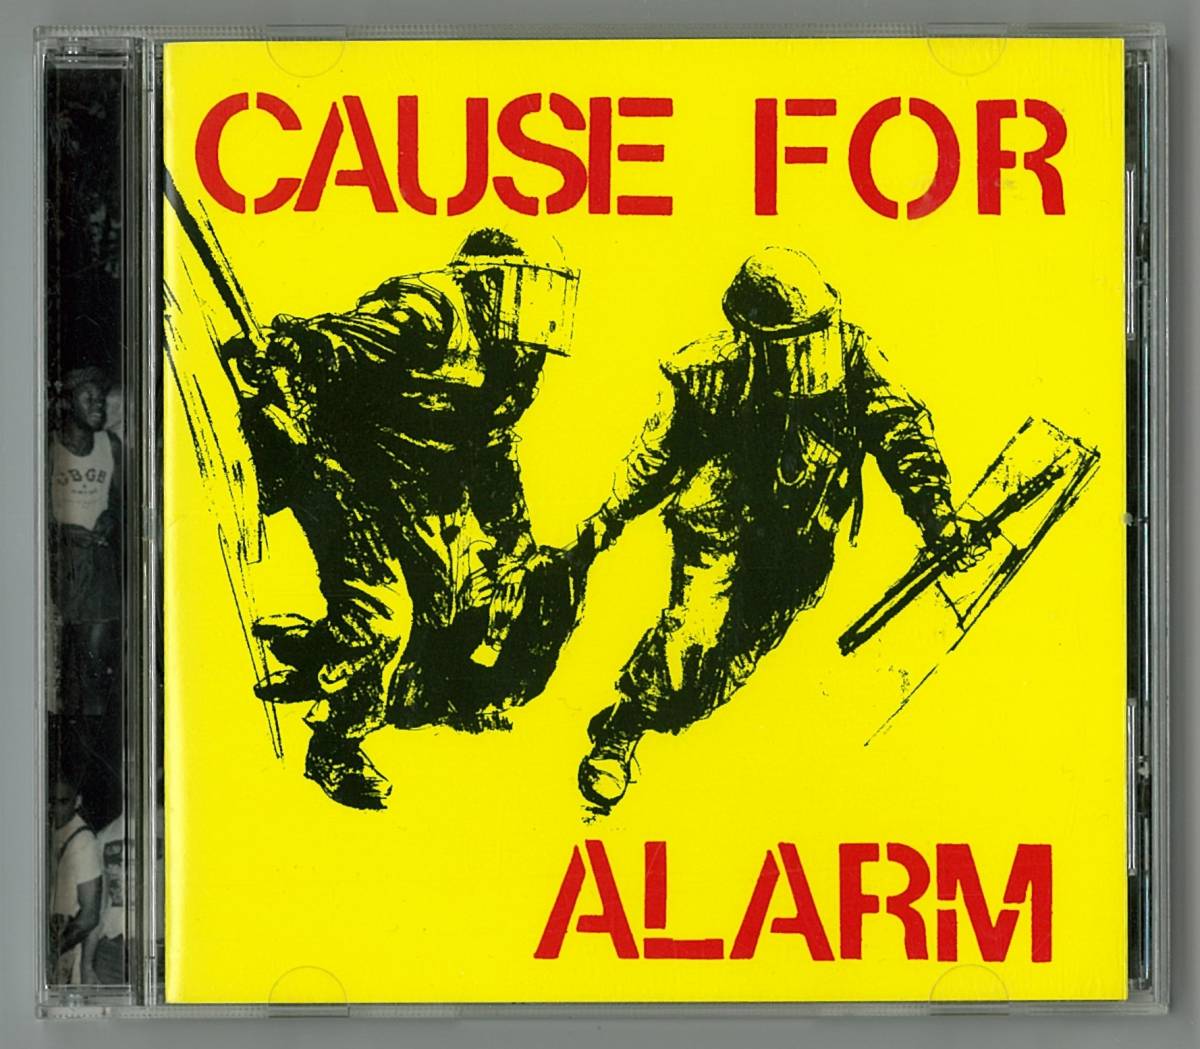 CAUSE FOR ALARM foreign record CD inspection key SxE agnostic front bold warzone cro mags bold youth of today sick of it all